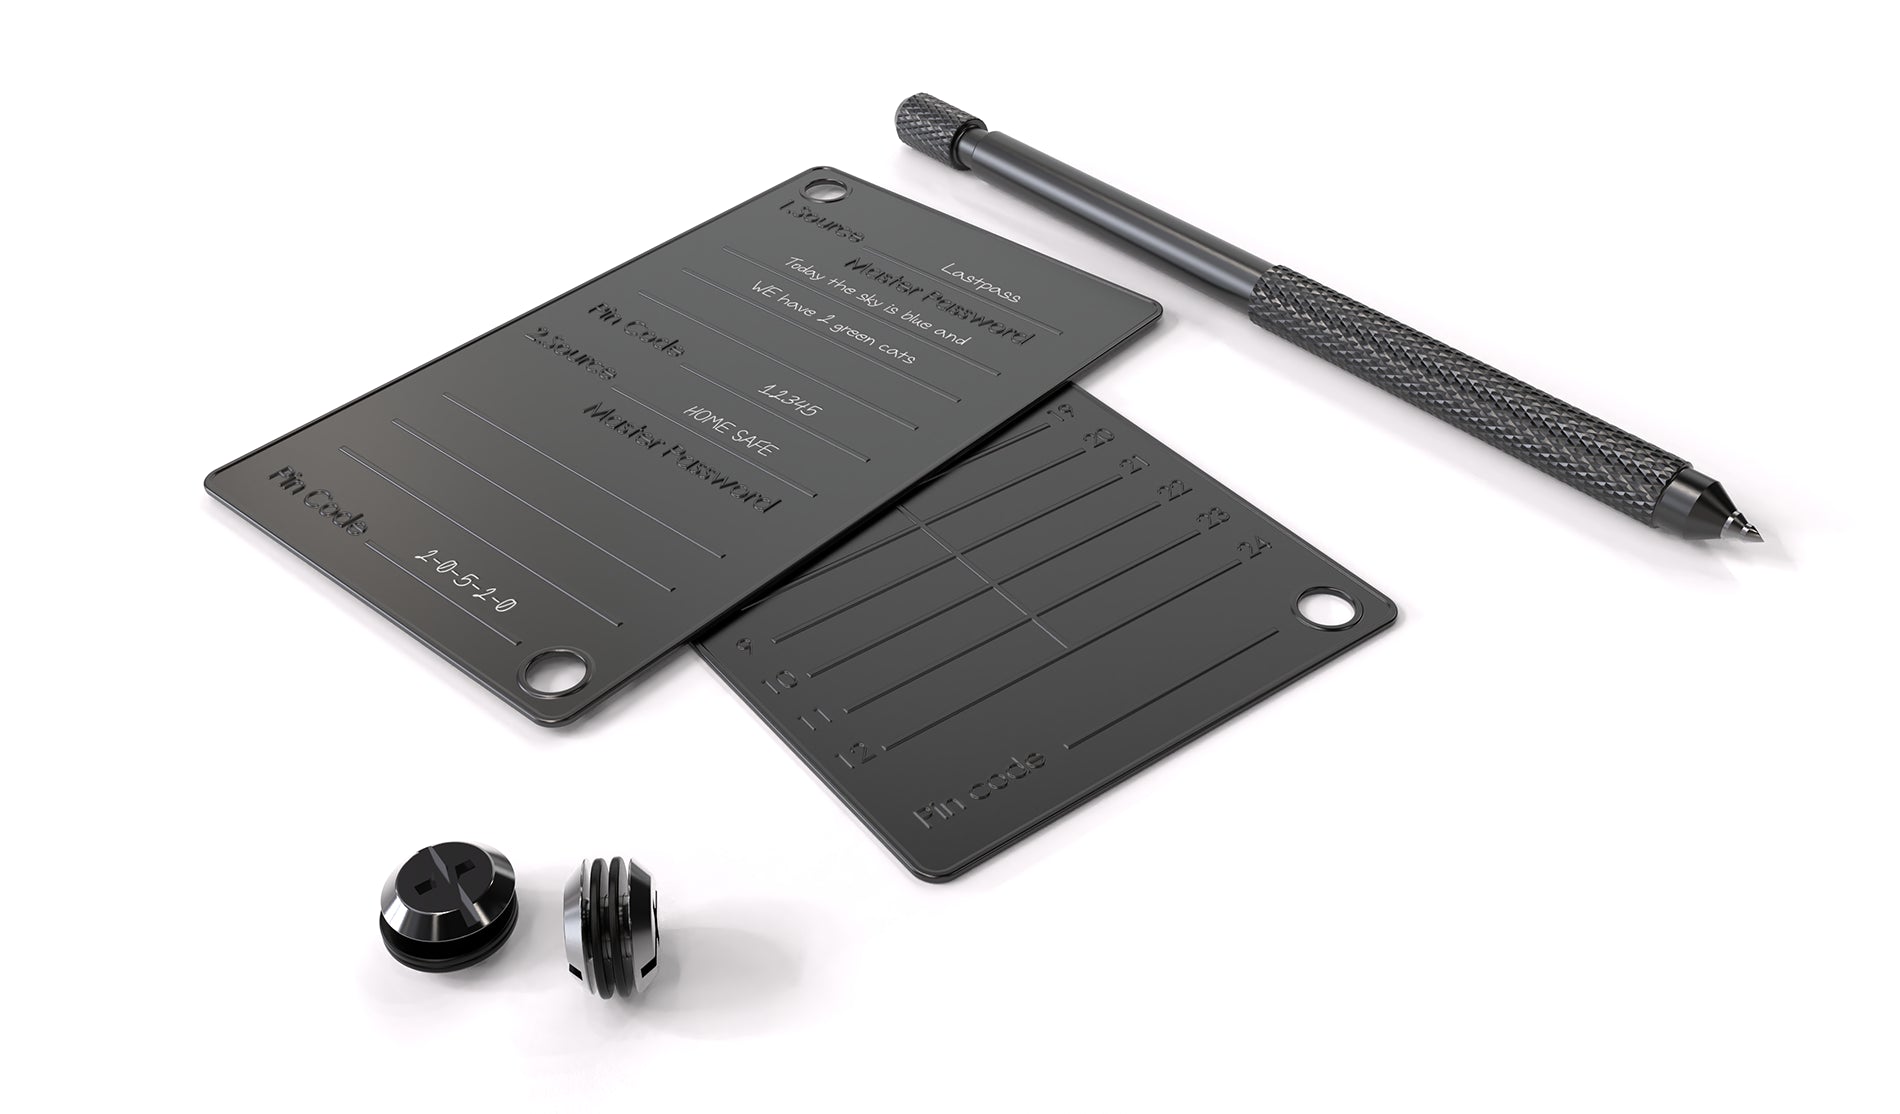 Two Black Seed Ink's master password wallet, screws and etching tool. One wallet shows etching, while the other wallet is blank